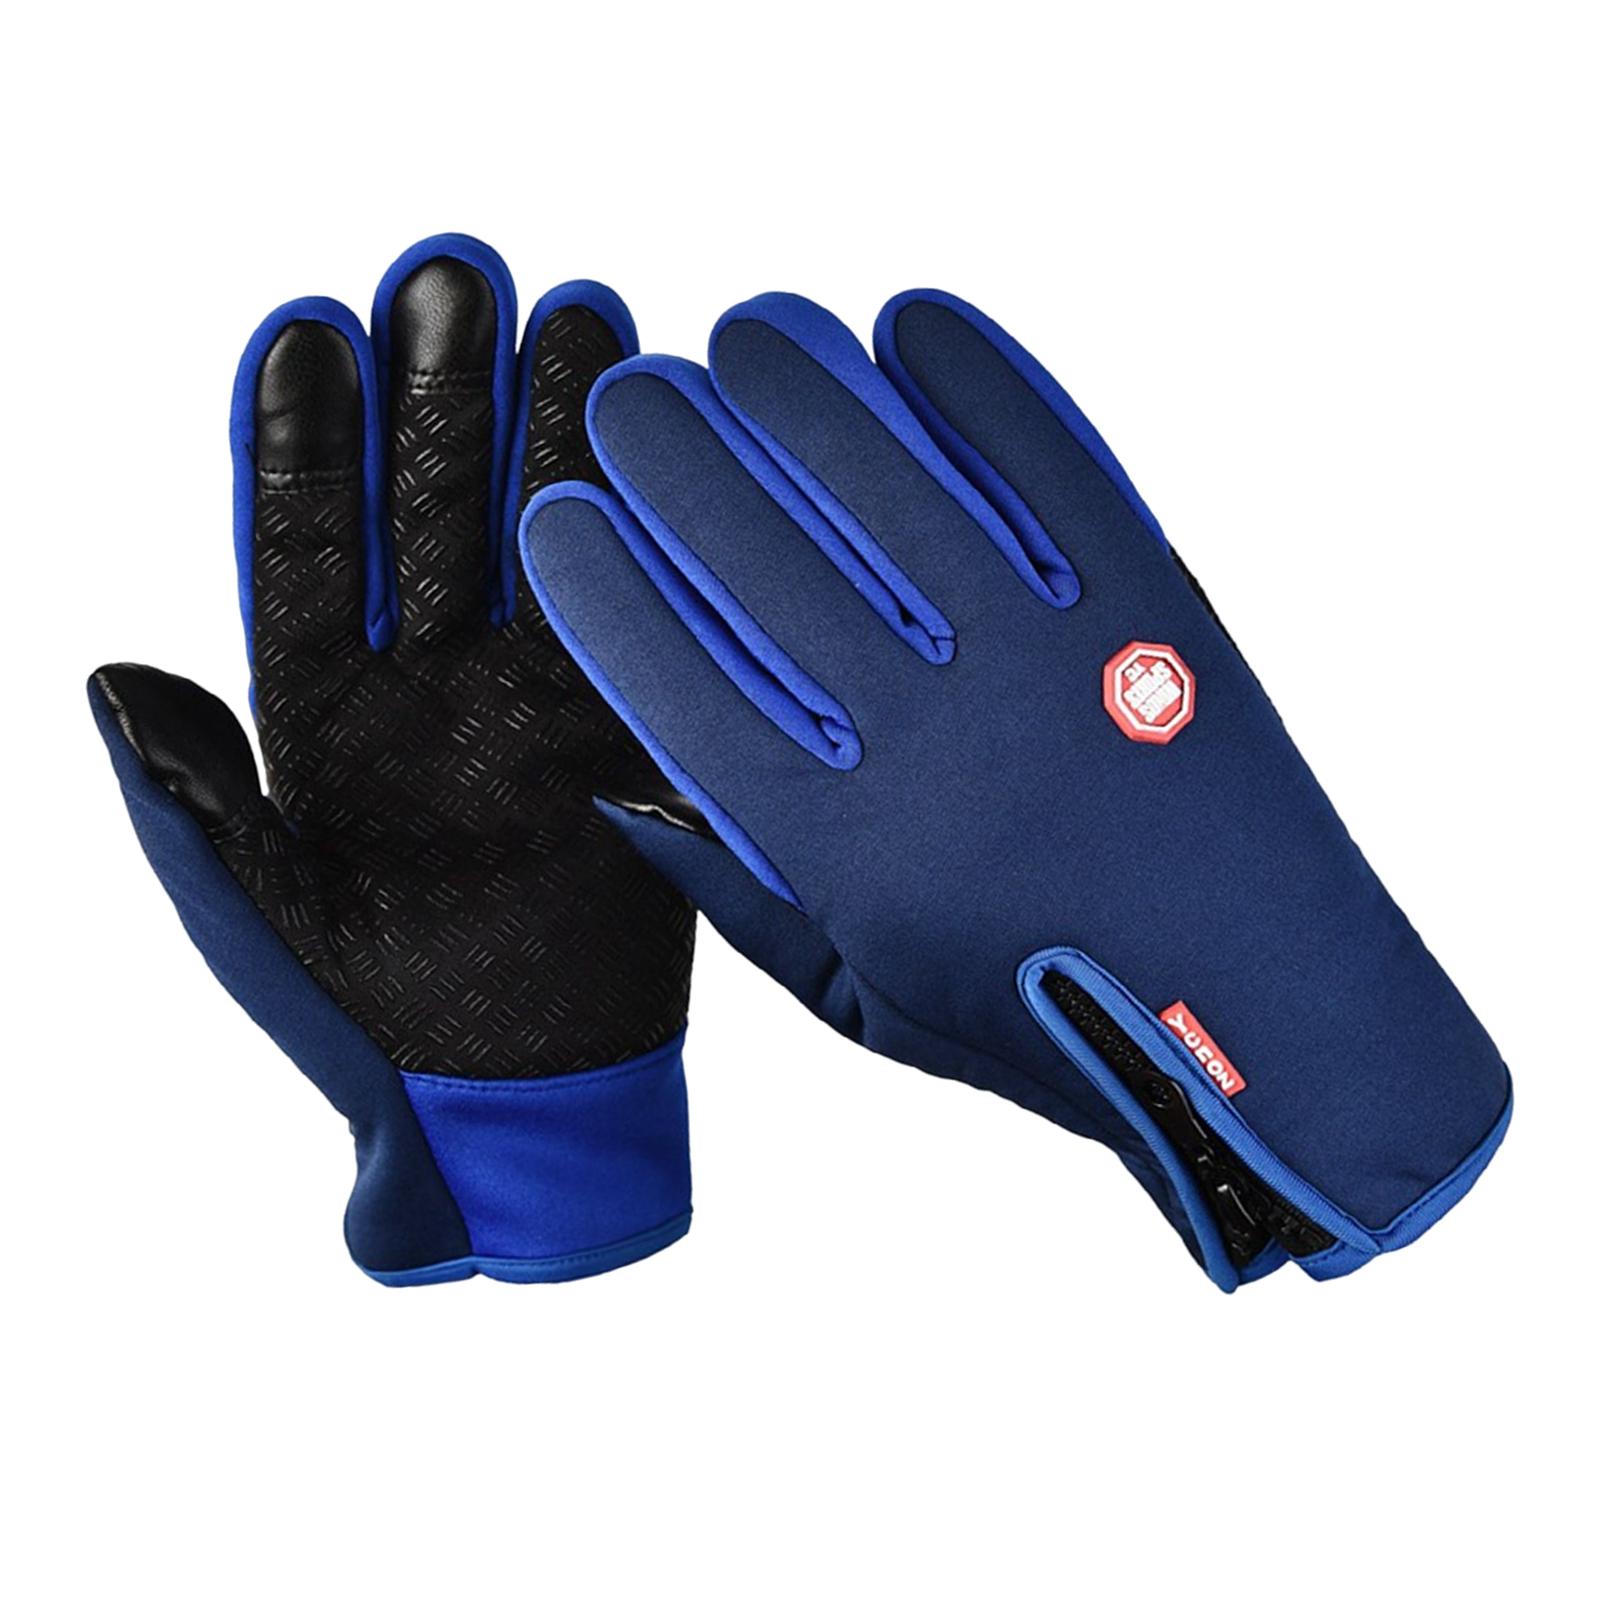 Winter Gloves Nonslip Thermal Gloves for Outdoor Running Sports Motorcycle Blue XL